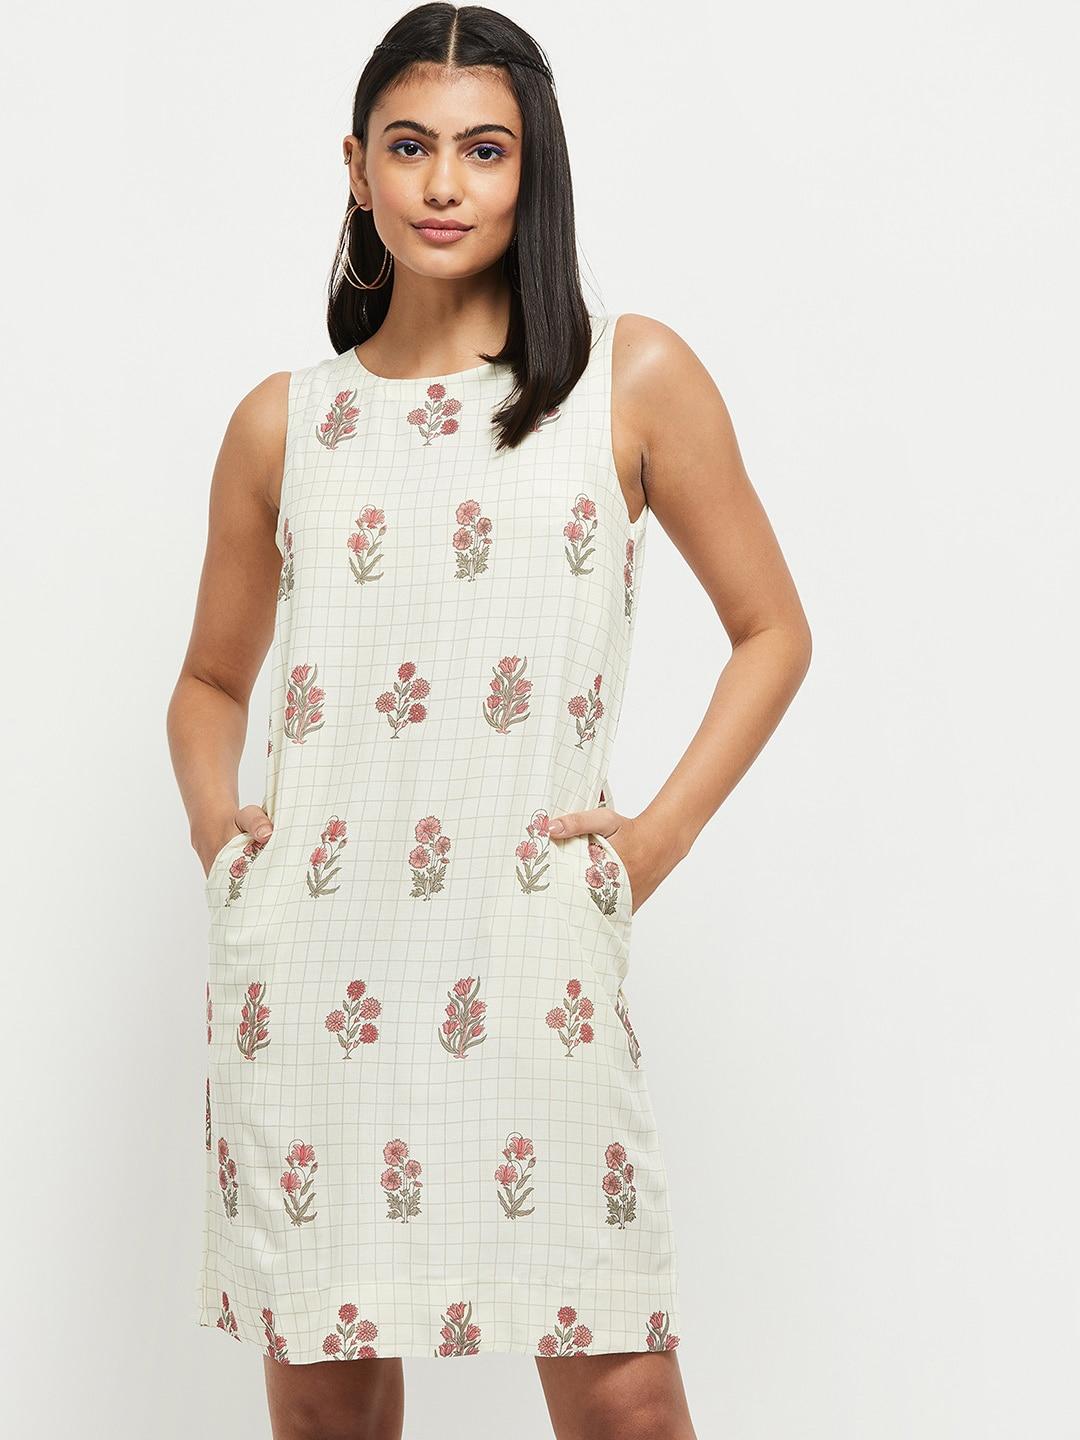 max-women-off-white-floral-a-line-dress